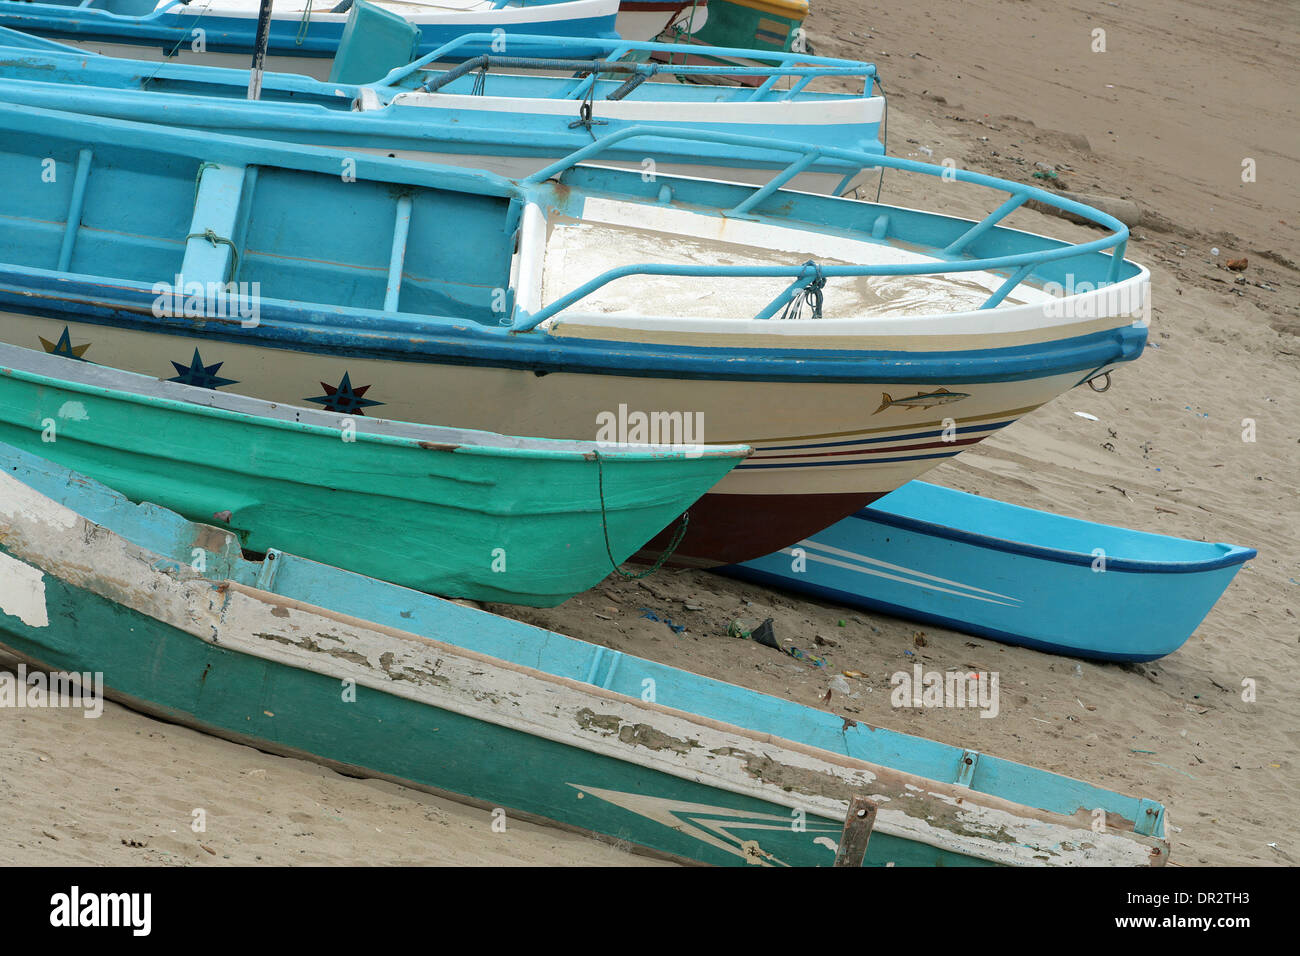 A wooden fishing boat pulled onto the sand covered beach at Puerto Lopez, Ecuador Stock Photo